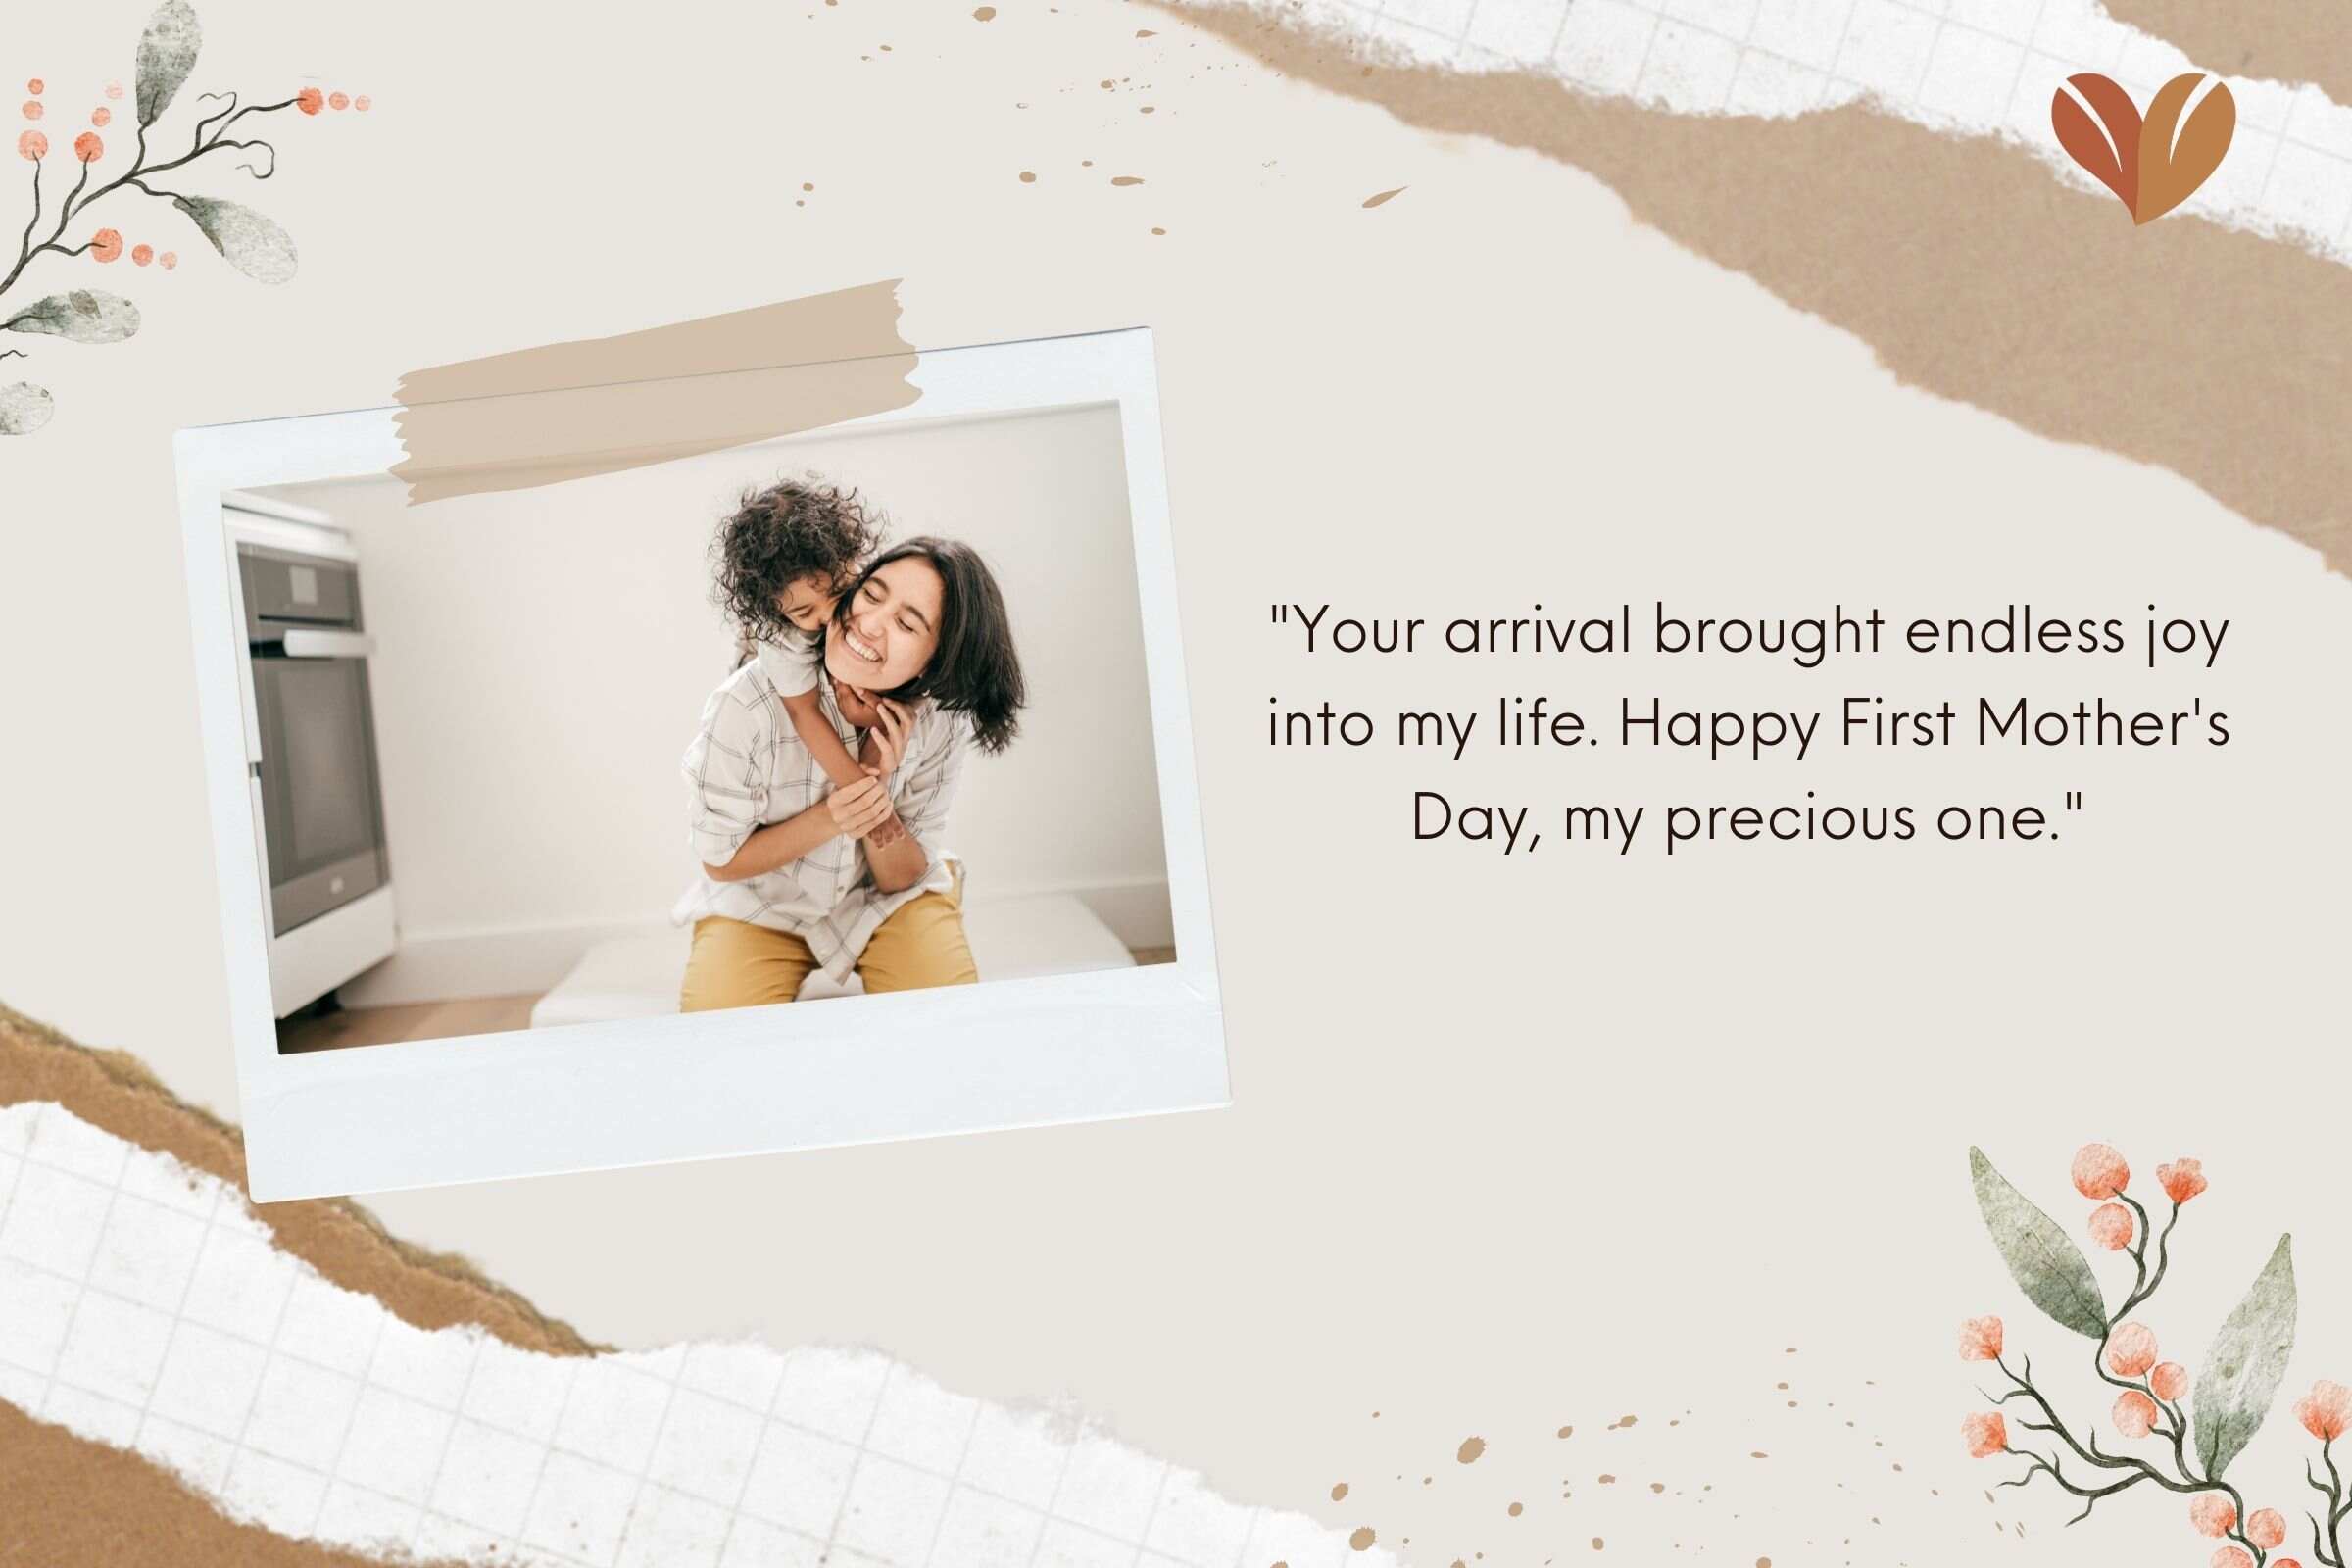 Sentimental First Mother's Day Messages for new mom